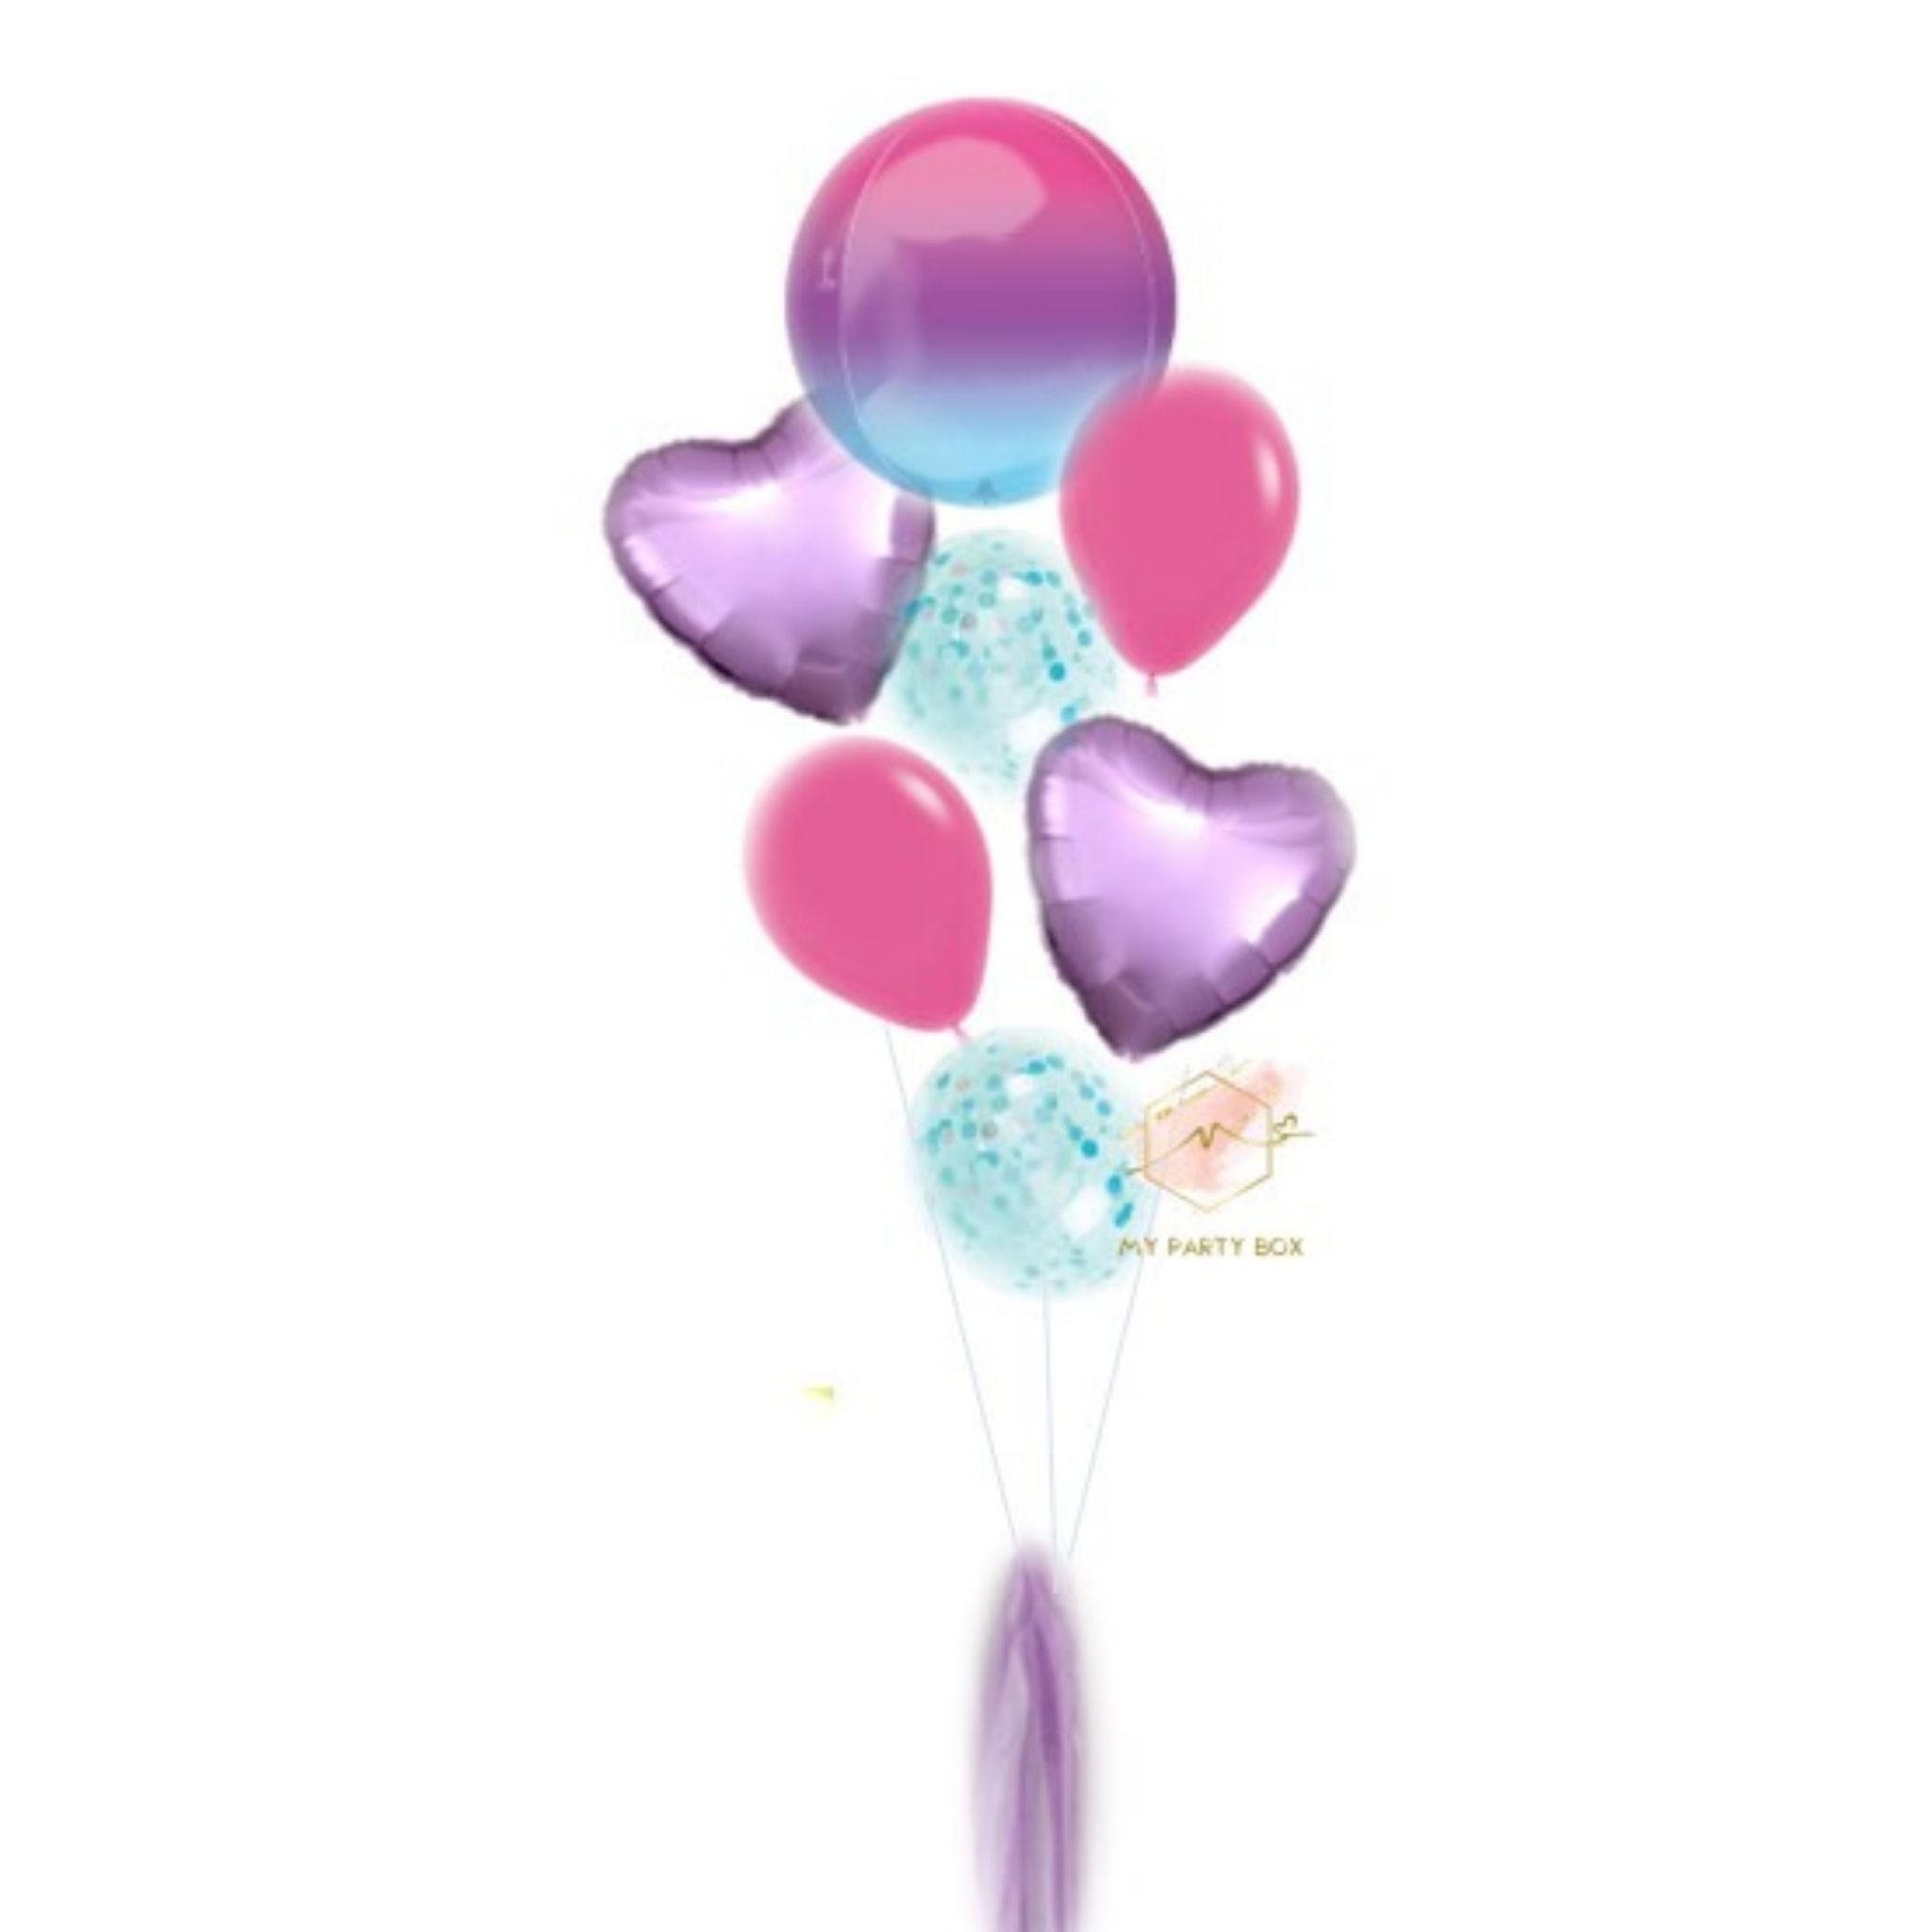 My Party Box Purple & Blue Deluxe Balloon Bouquet